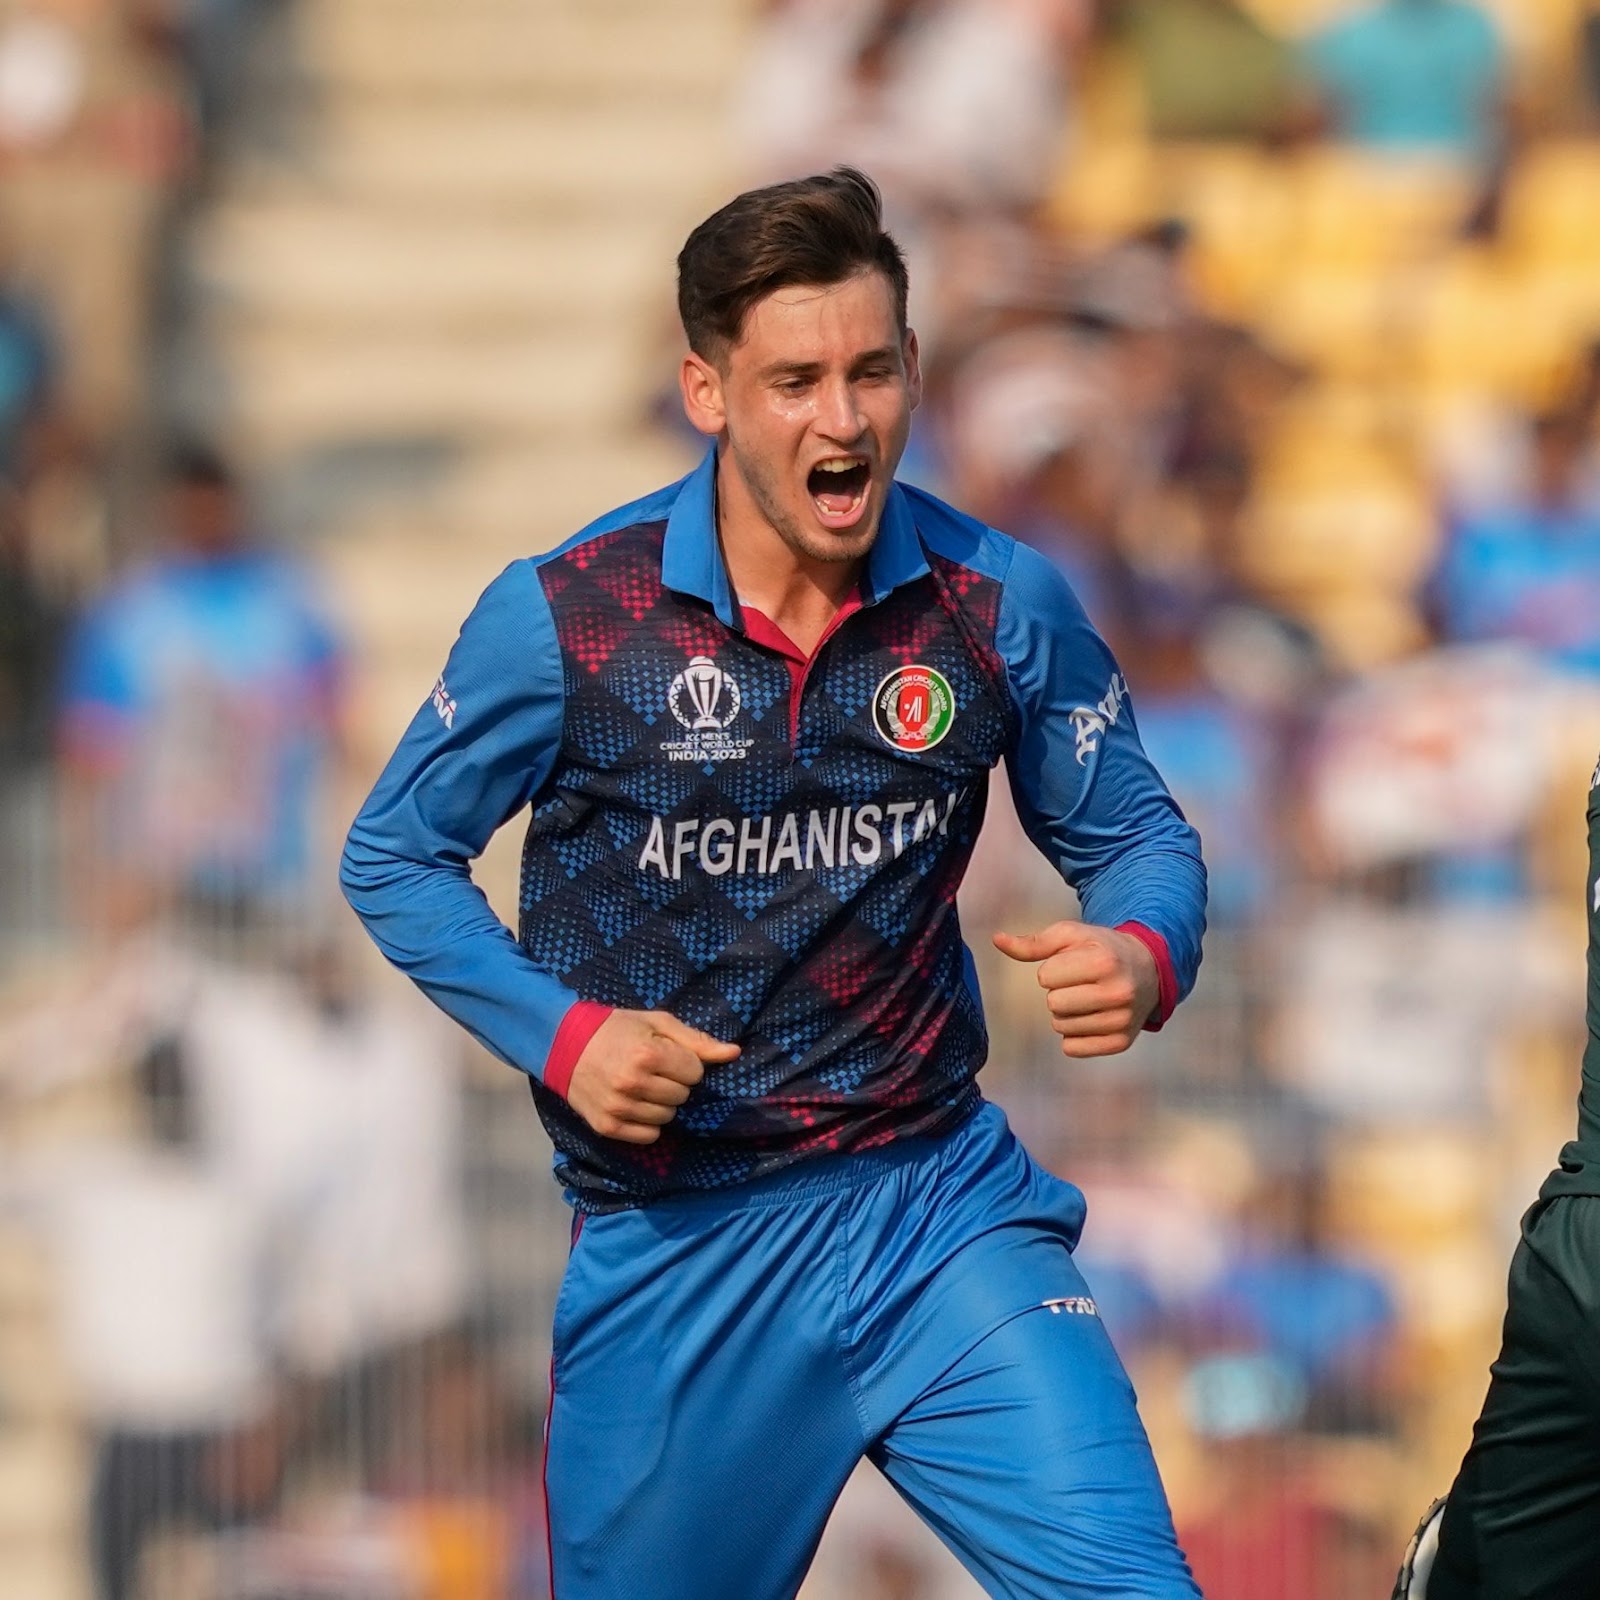 Afghanistan was a surprise package at the World Cup